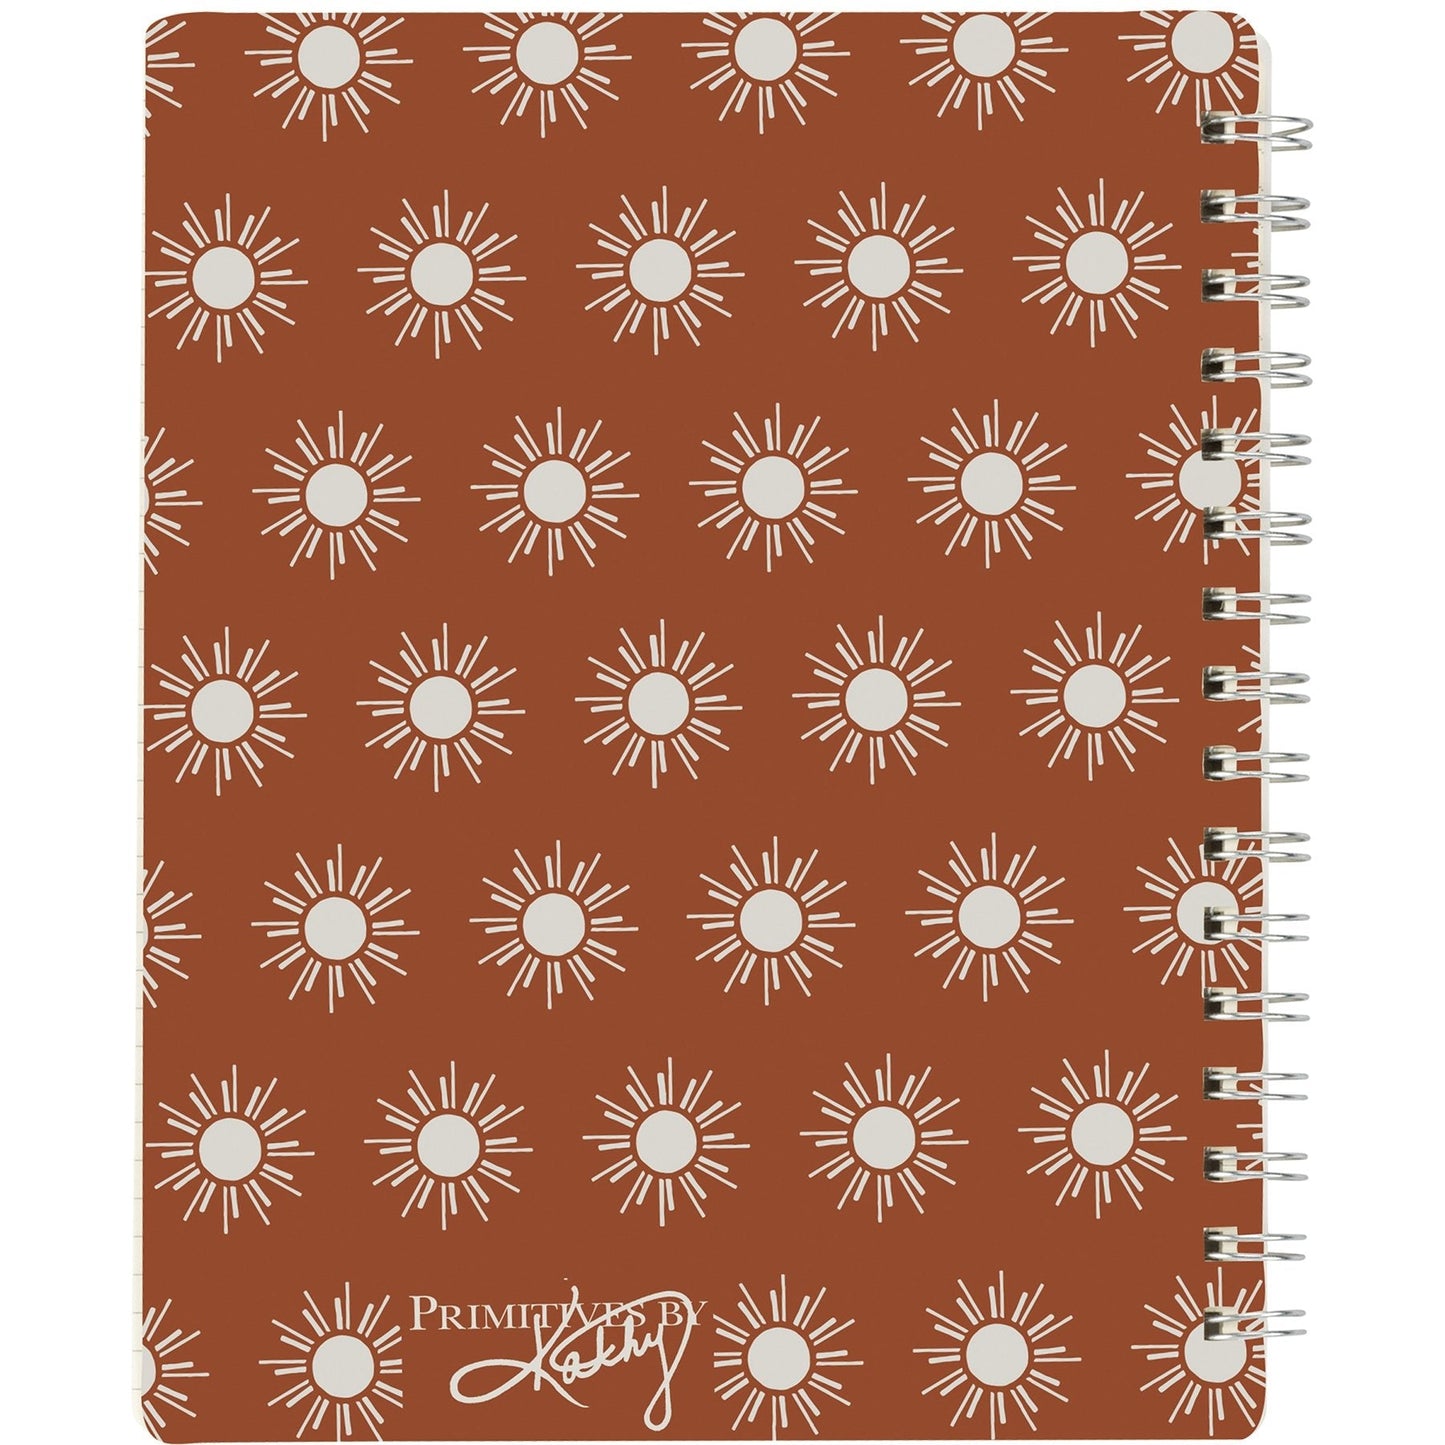 Soul Full Of Sunshine Spiral Notebook | 5.75" x 7.50" | 120 Lined Pages